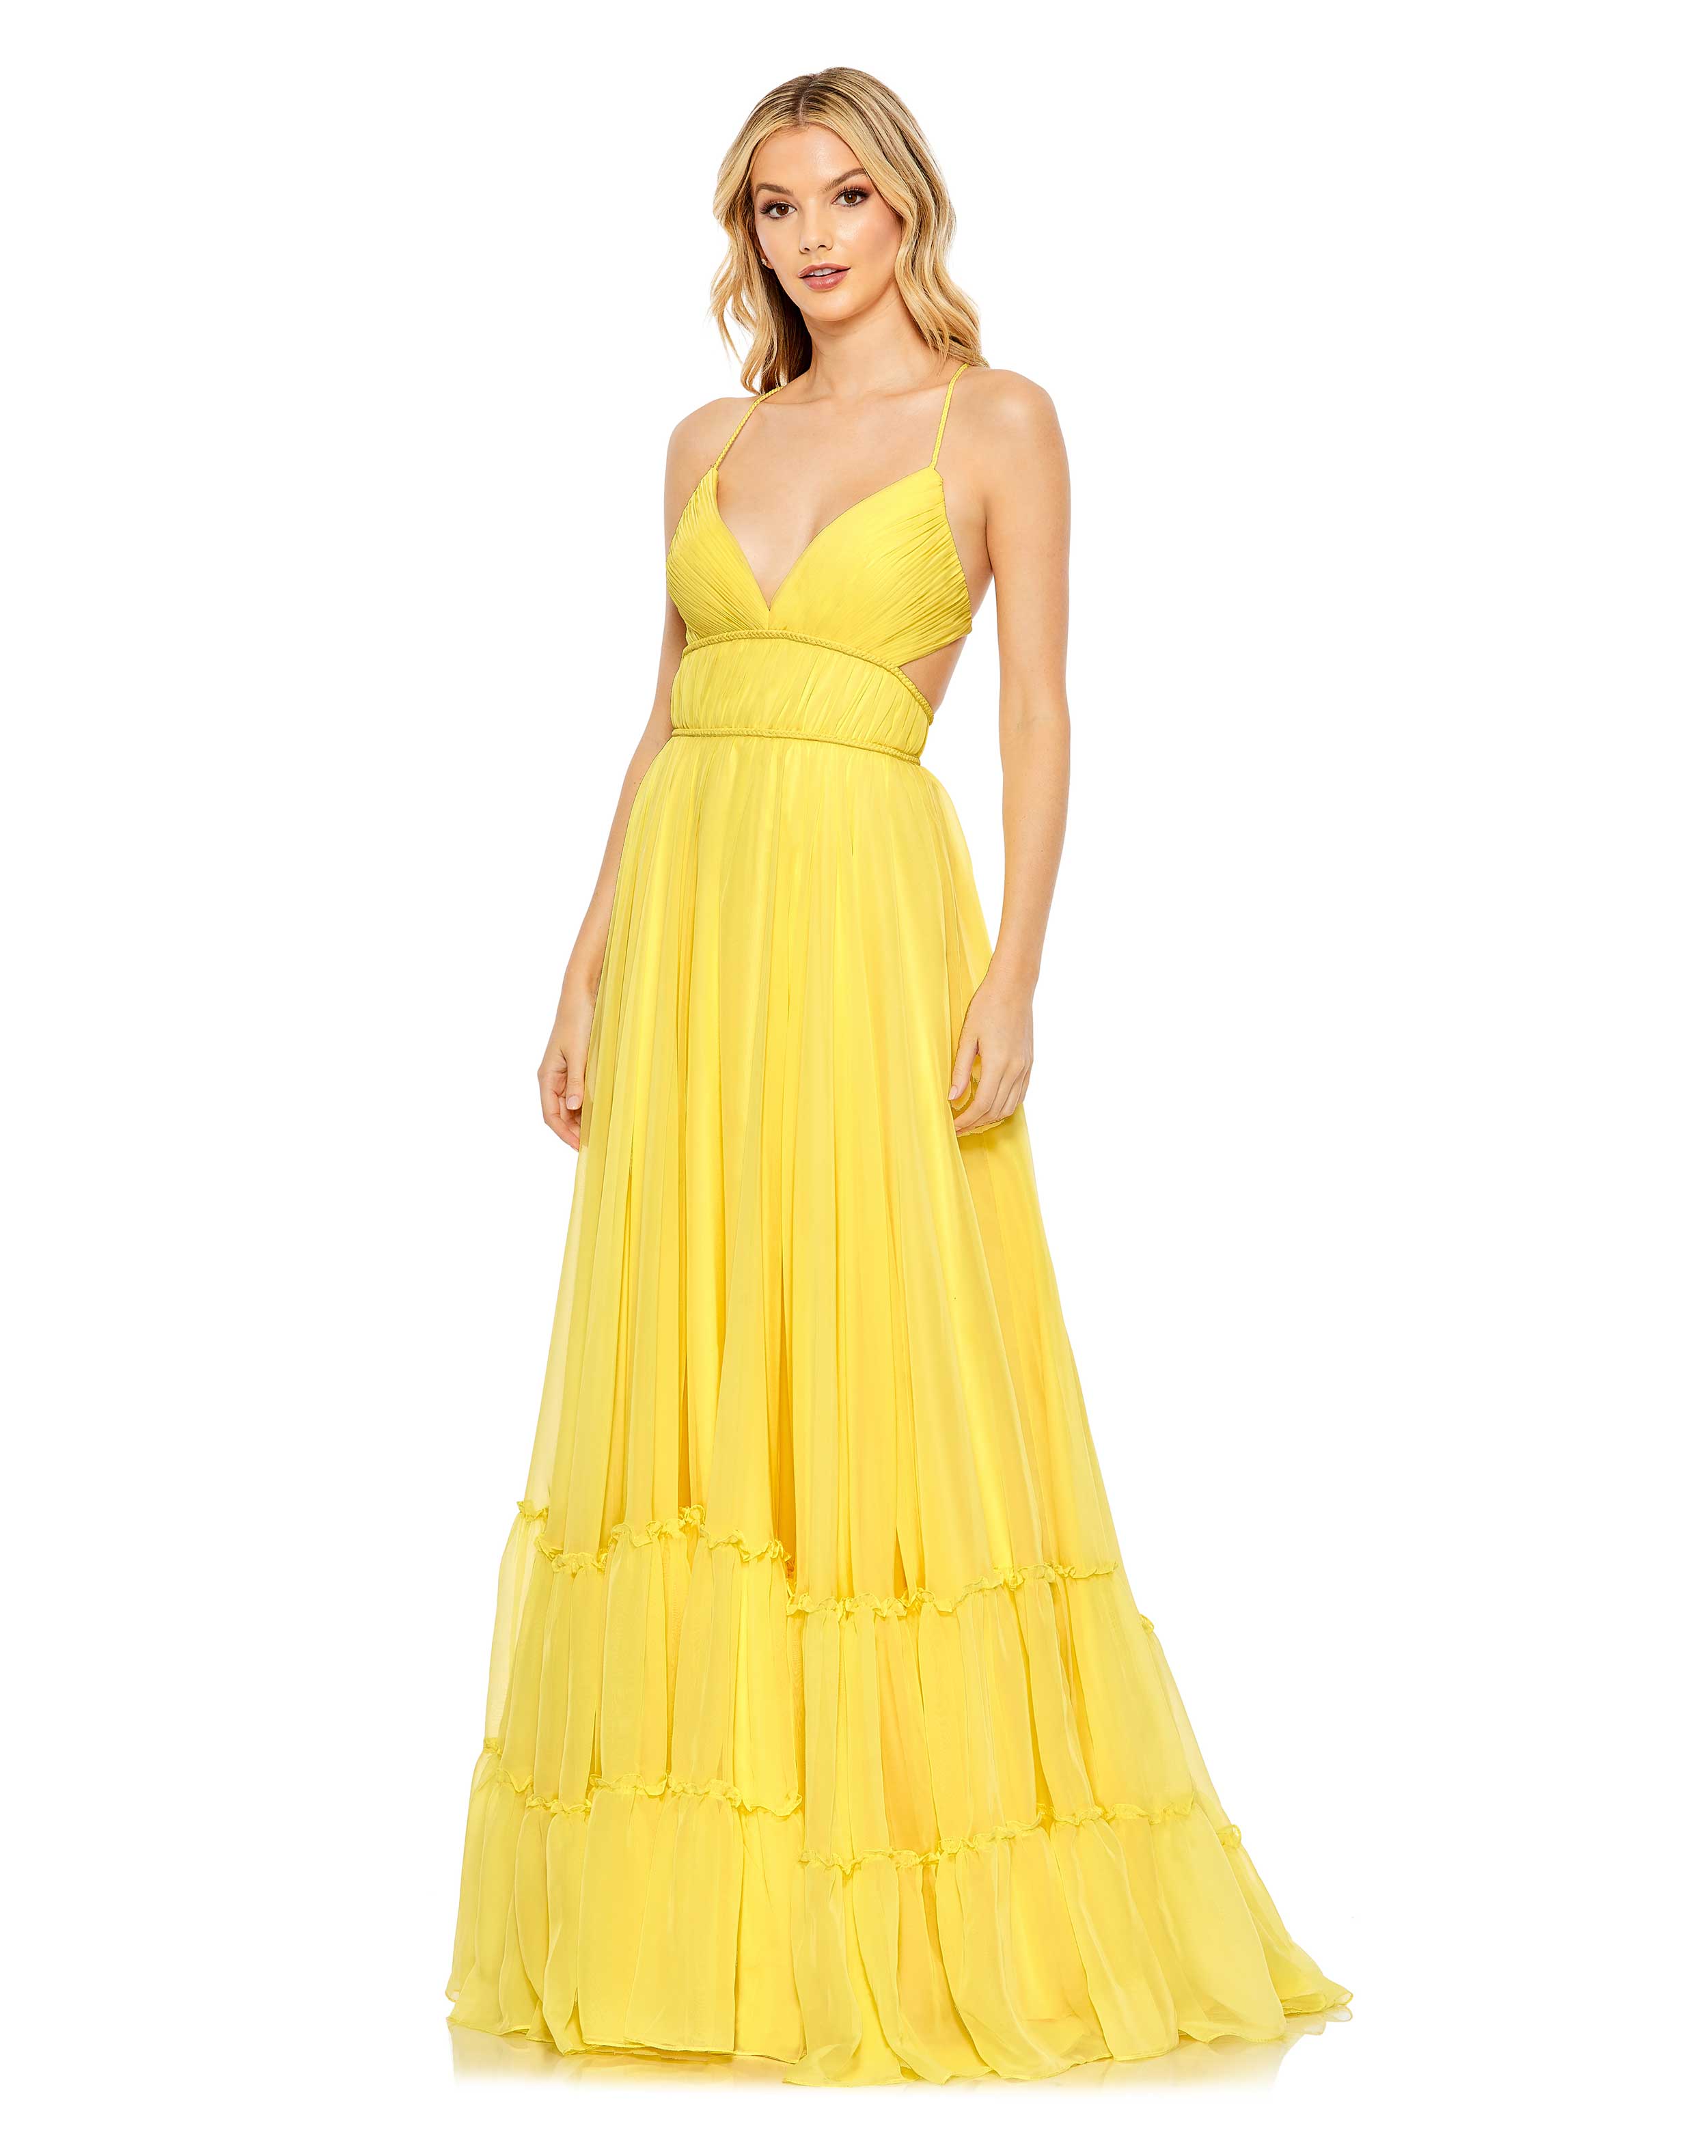 Solid Tiered Ruffle Strapless Dress - FINAL SALE